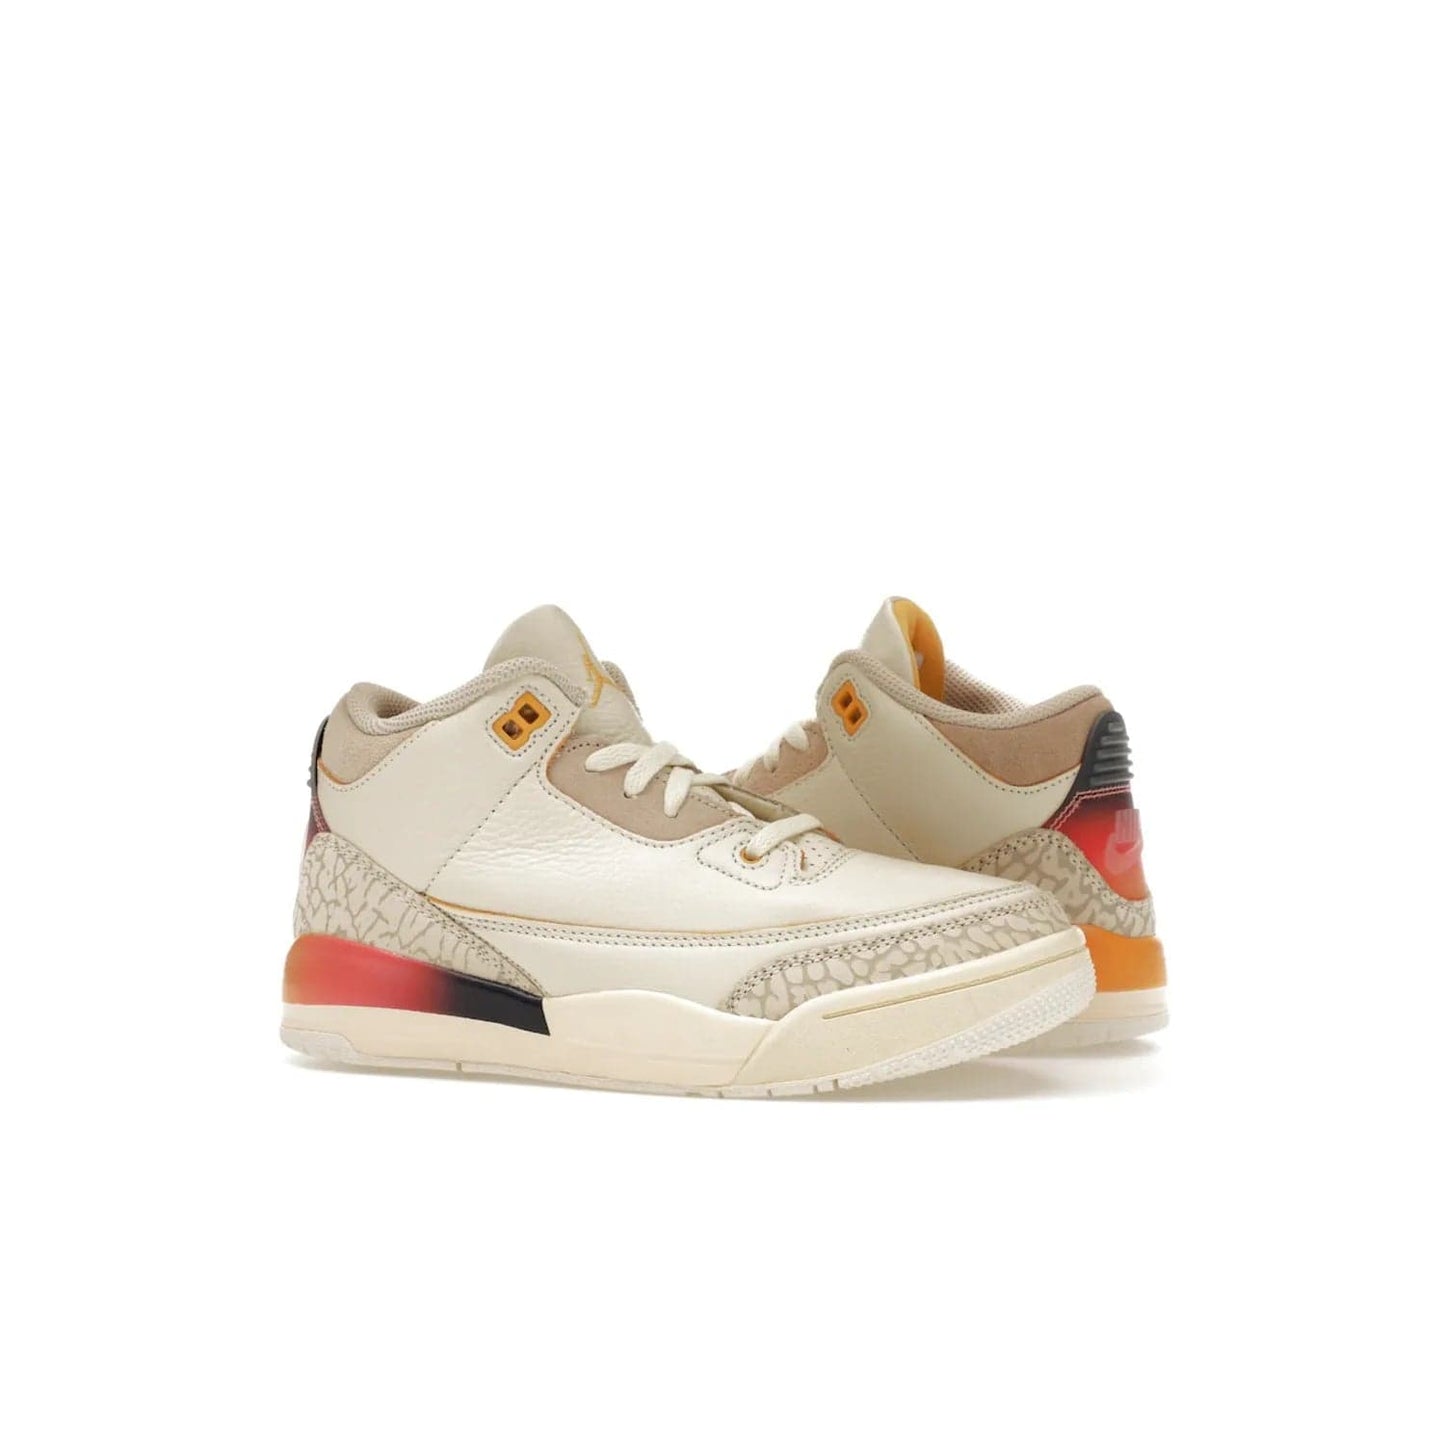 Jordan 3 Retro SP J Balvin Medellín Sunset (PS) - Image 3 - Only at www.BallersClubKickz.com - Jordan 3 Retro SP J Balvin Medellín Sunset (PS) arrives 2023-09-23. Add an edgy touch to your look with this vibrant multi-color sneaker.